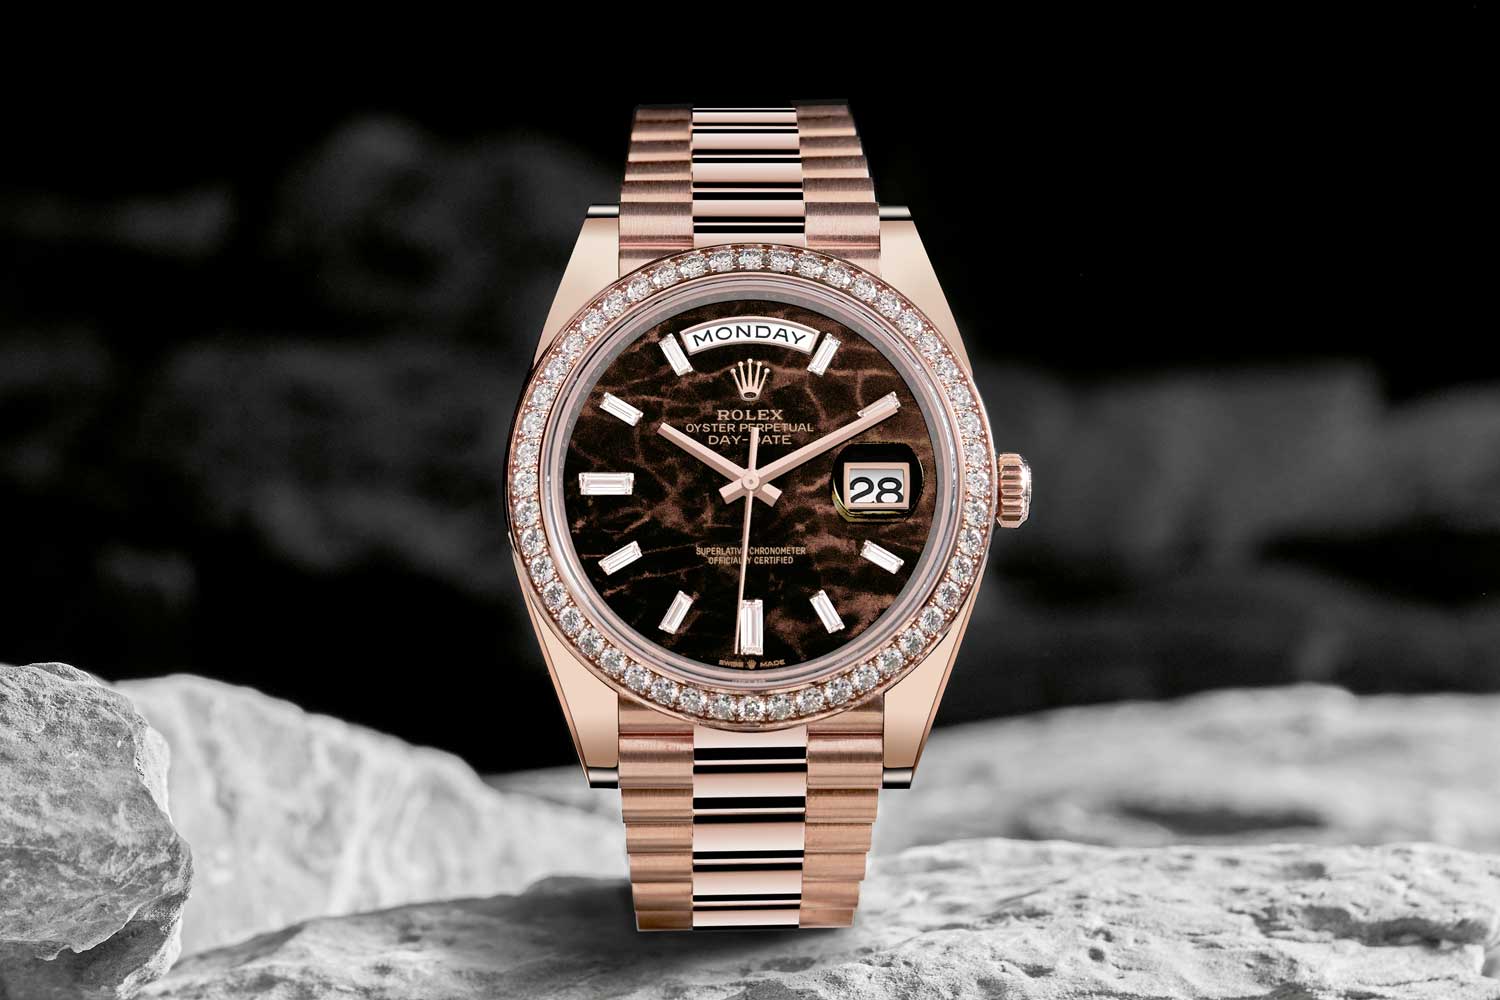 The eisenkiesel is the latest stone dial to be released by Rolex, seen here in the Oyster Perpetual Day-Date 40 in 18 ct Everose gold with brilliant-cut diamond bezel